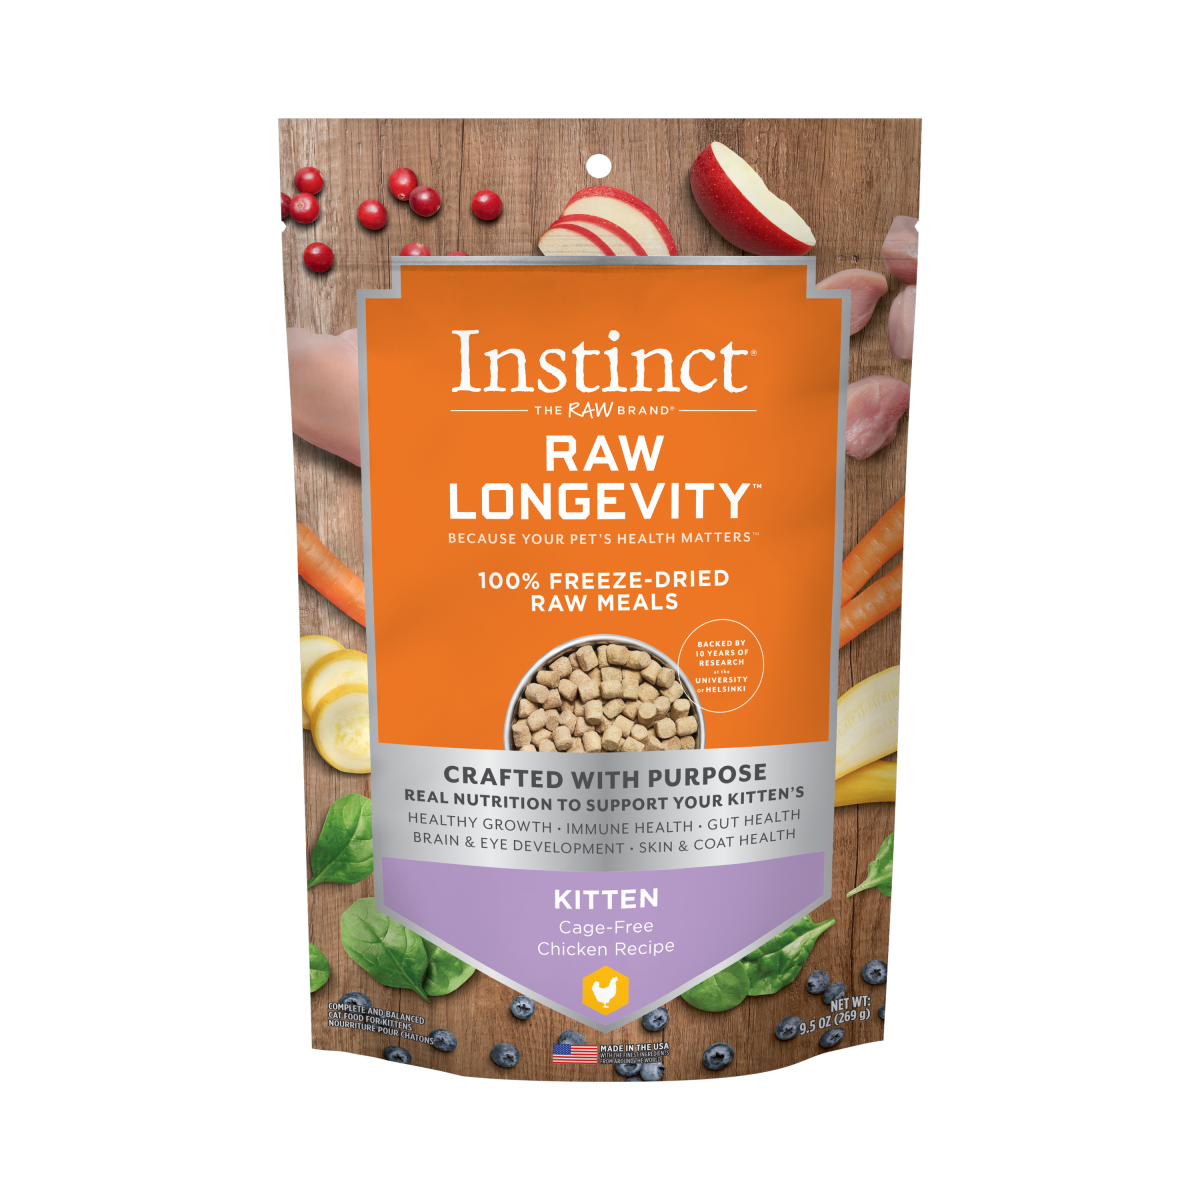 Instinct - Raw Longevity 100% Freeze-Dried Raw Meals Cage-Free Chicken Recipe (For Kittens)